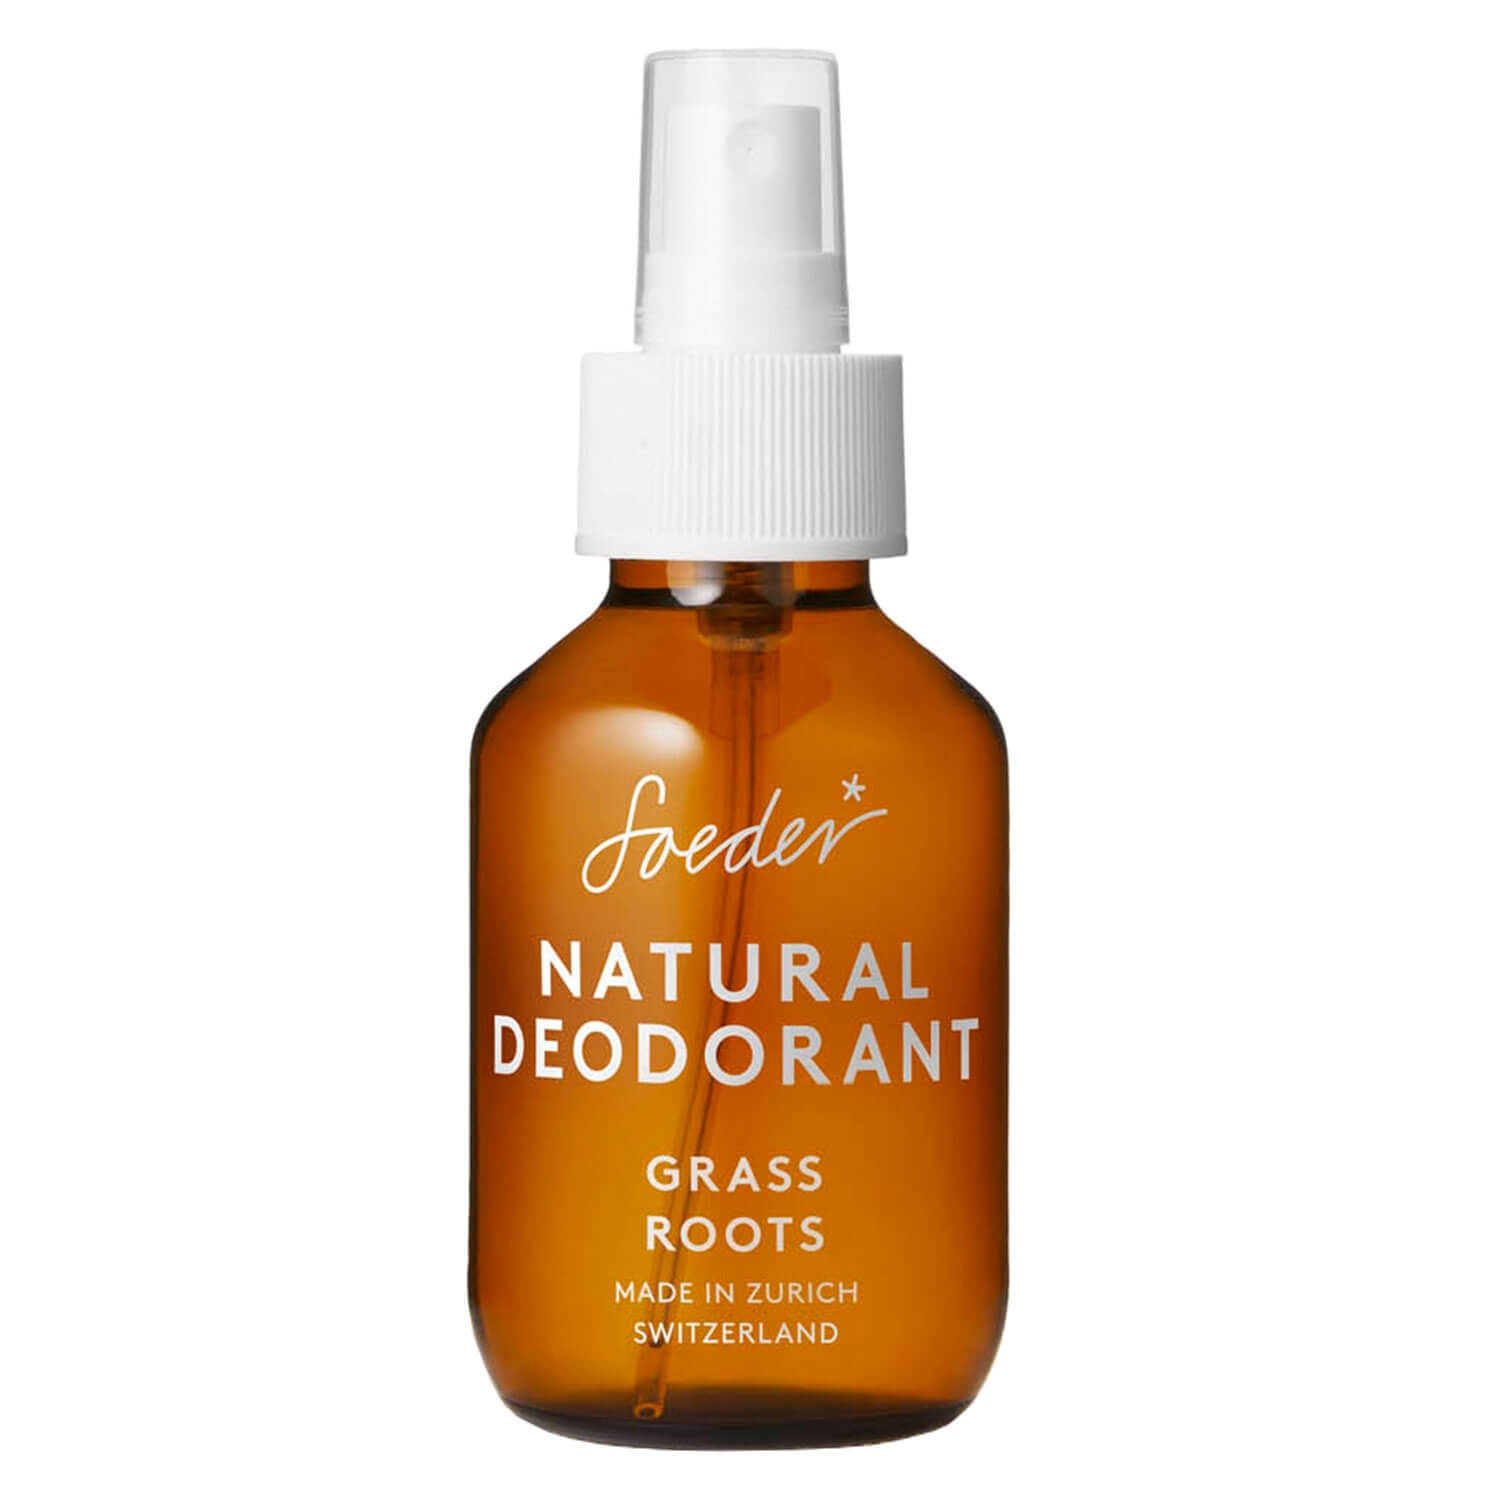 Product image from Soeder - Natural Deodorant Grass Roots